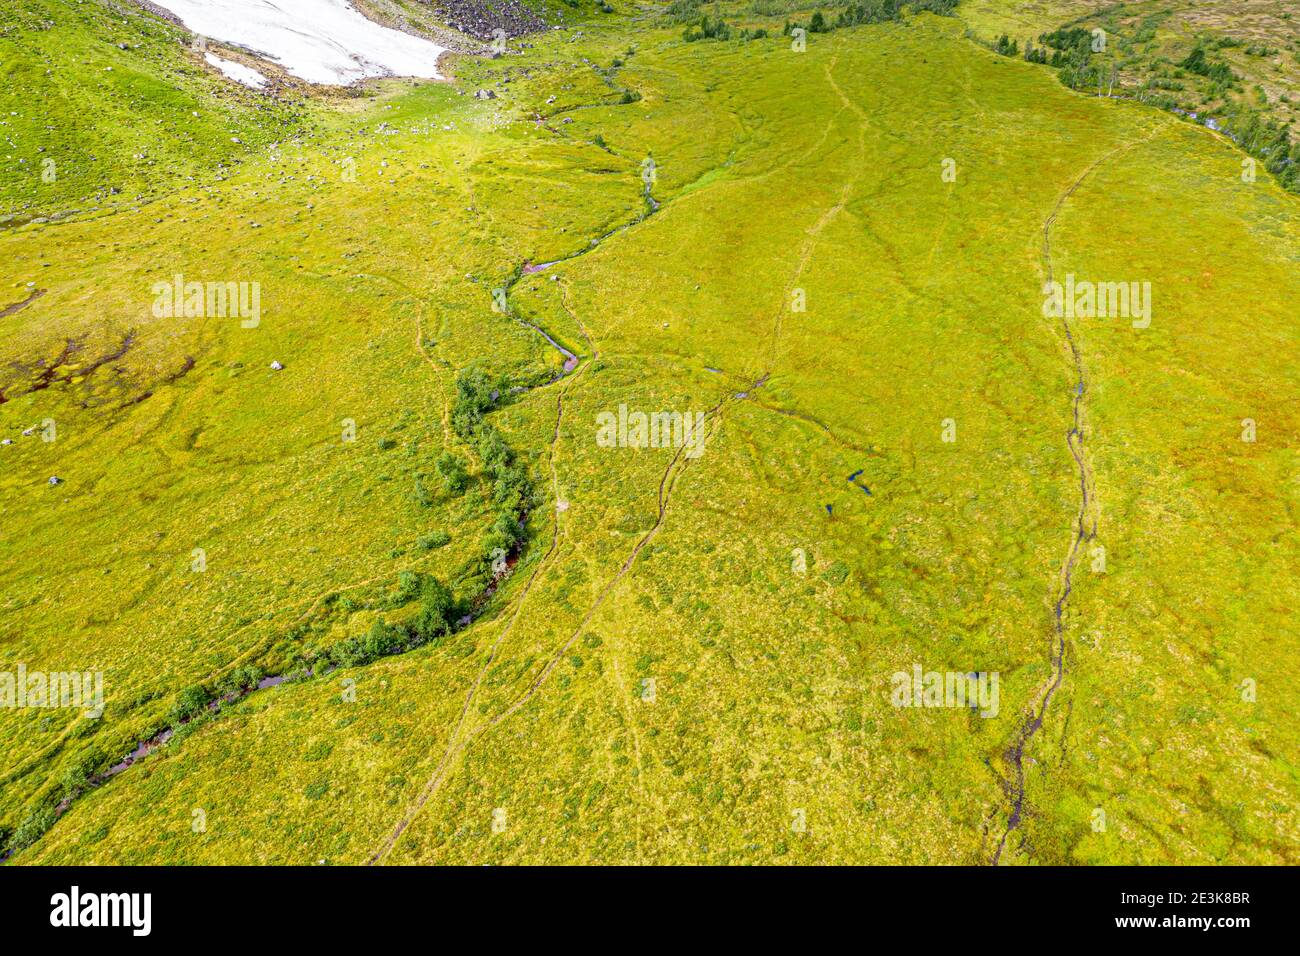 Aerial view of valley Langedalen, hiking path, stream meanders through green landscape, Sognefjord region, Norway. Stock Photo